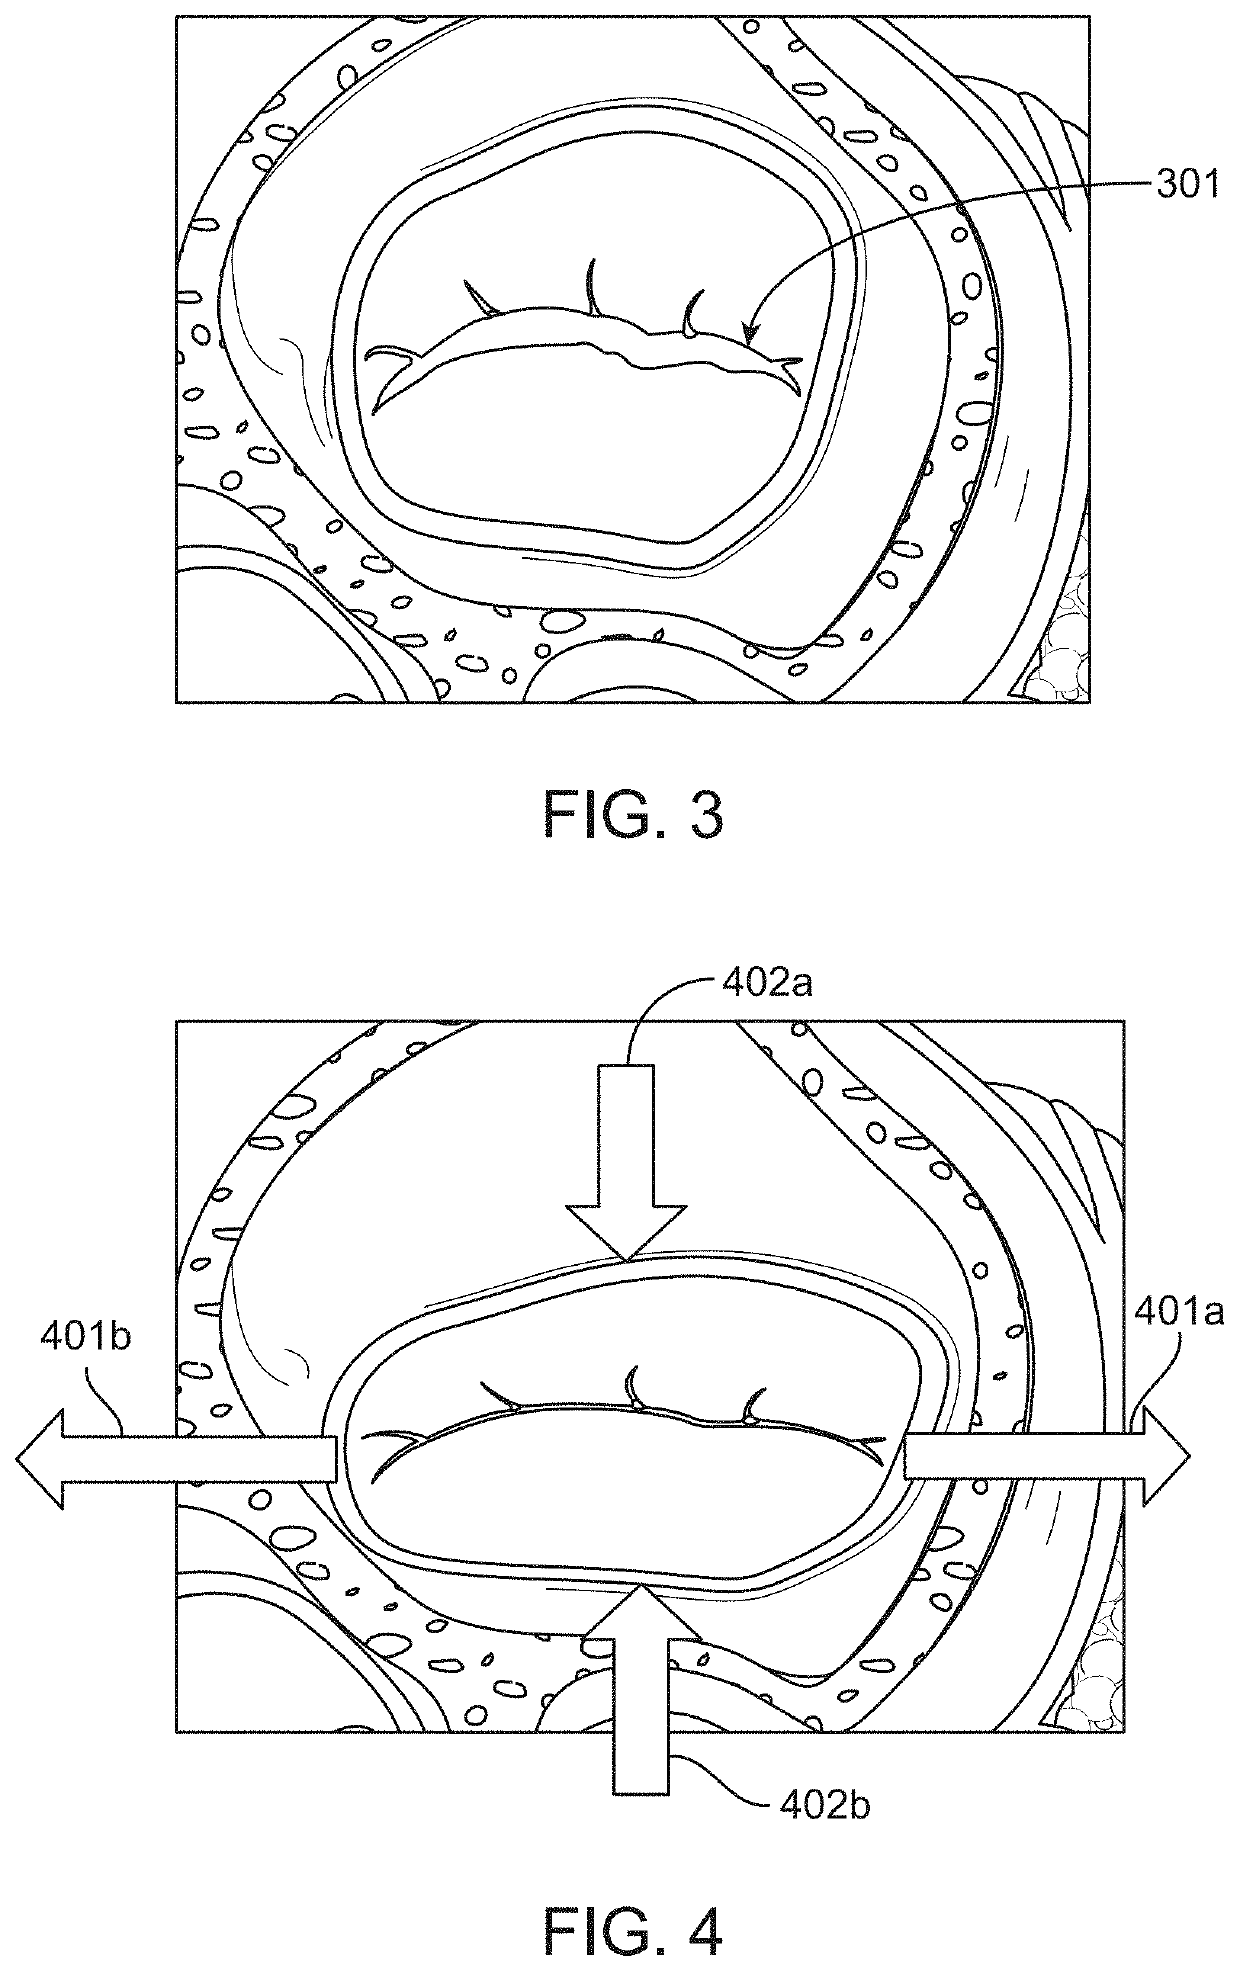 Methods and devices for heart valve repair